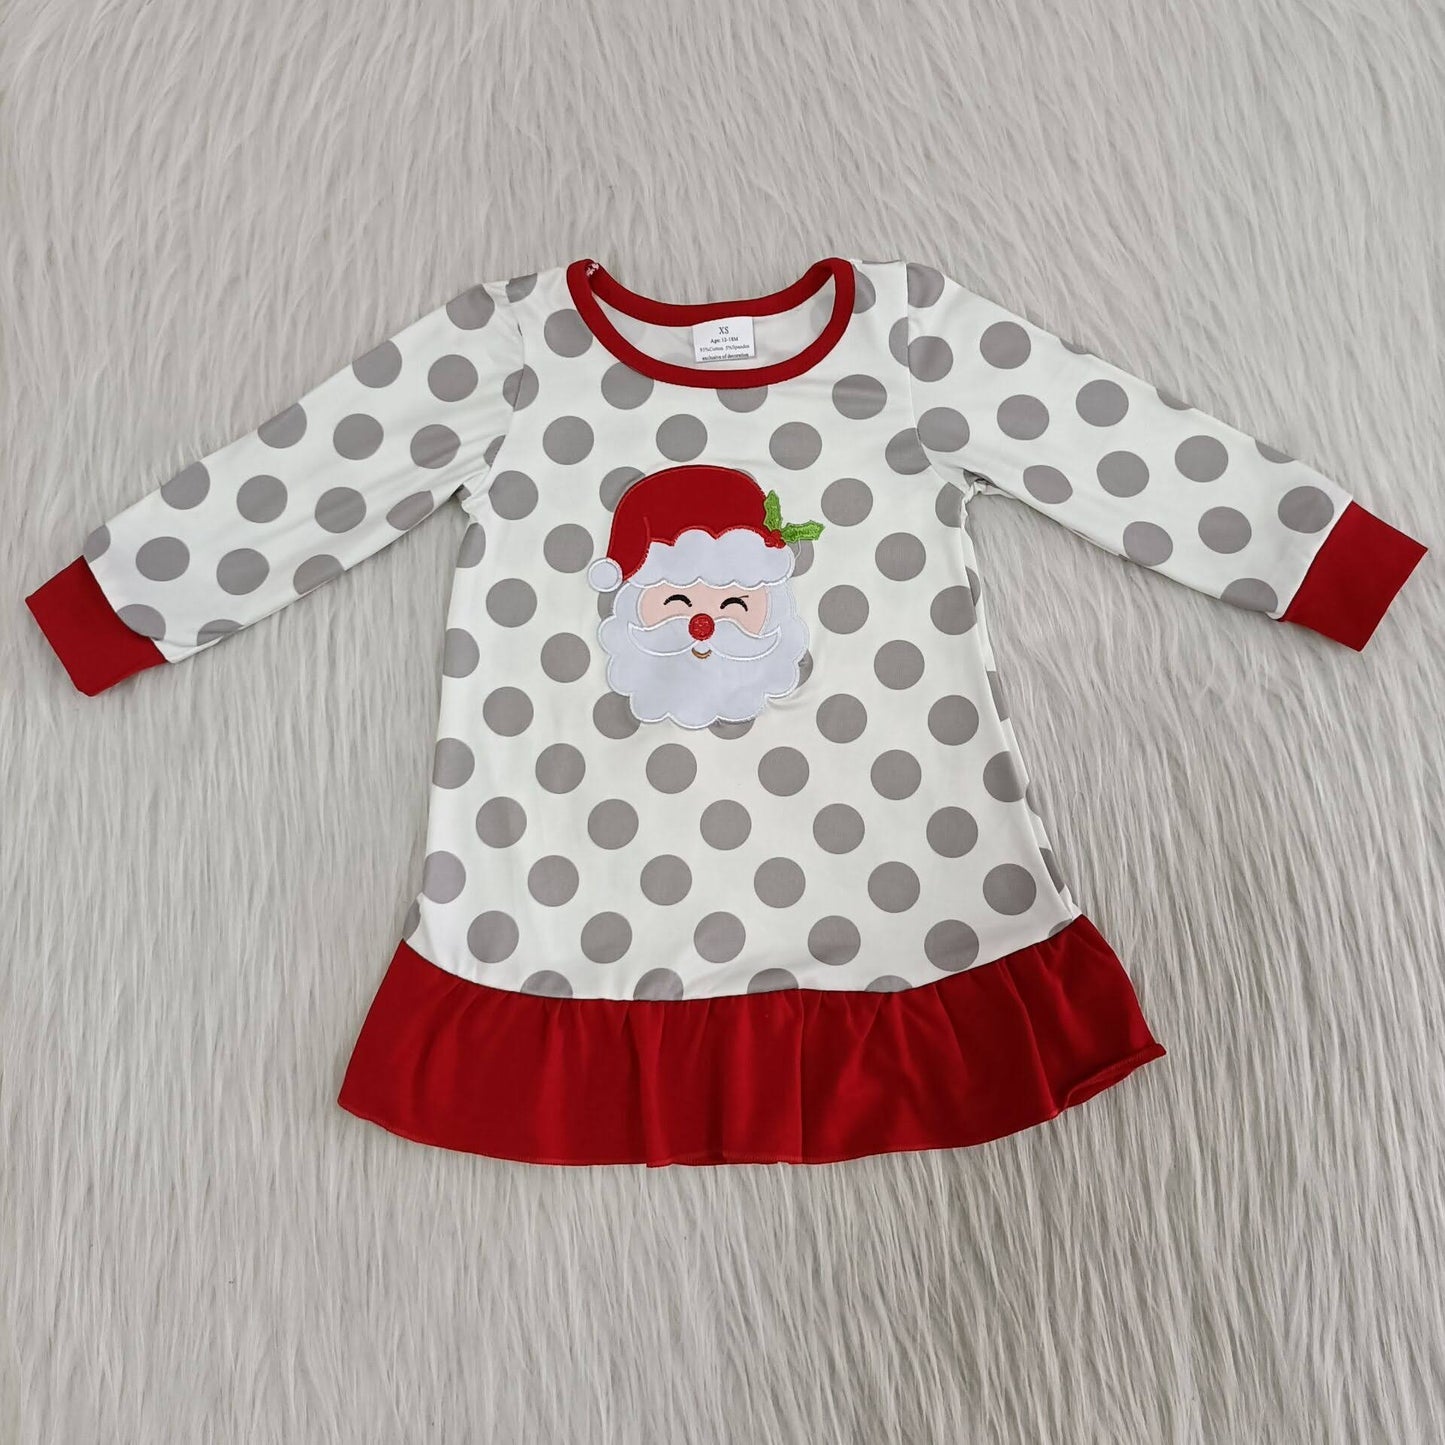 Santa Claus embroidery girl's nightdress